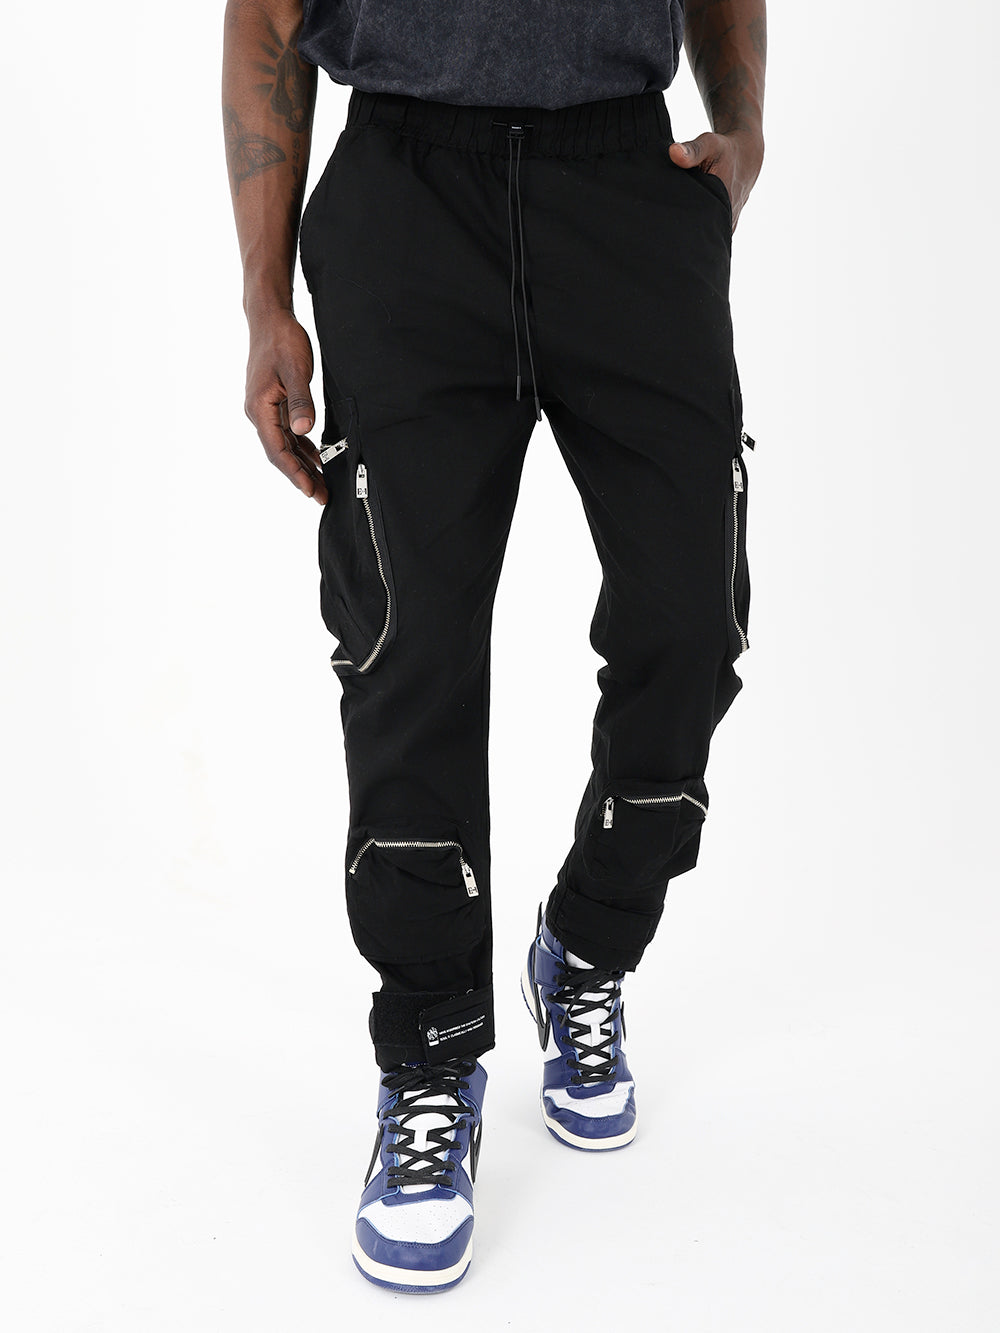 A man wearing Raider Joggers, black cargo pants with zippers.